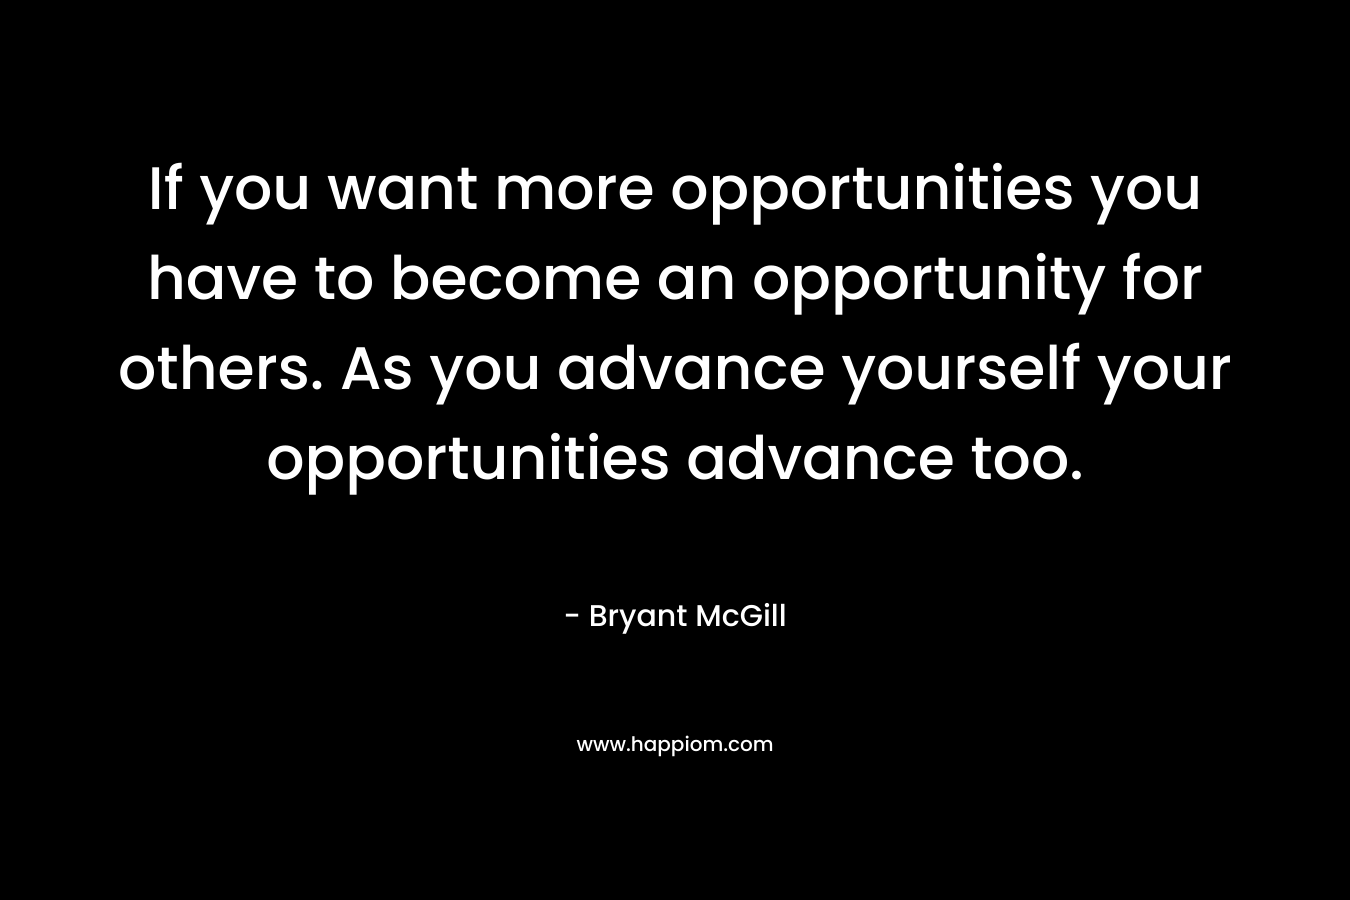 If you want more opportunities you have to become an opportunity for others. As you advance yourself your opportunities advance too.